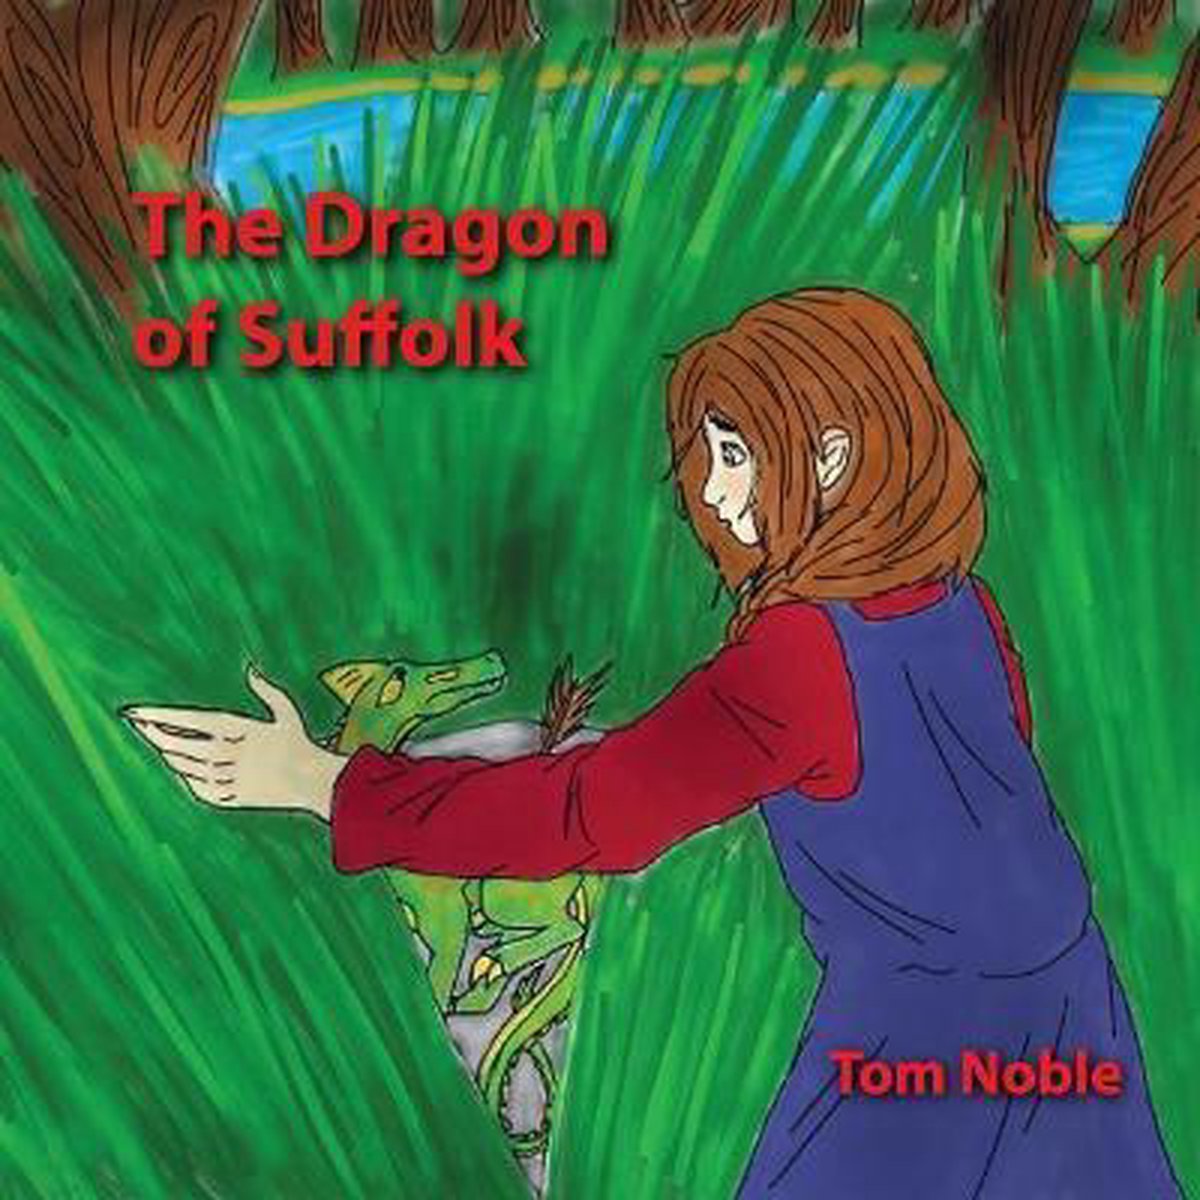 Dragon Tales-The Dragon of Suffolk - Tom Noble